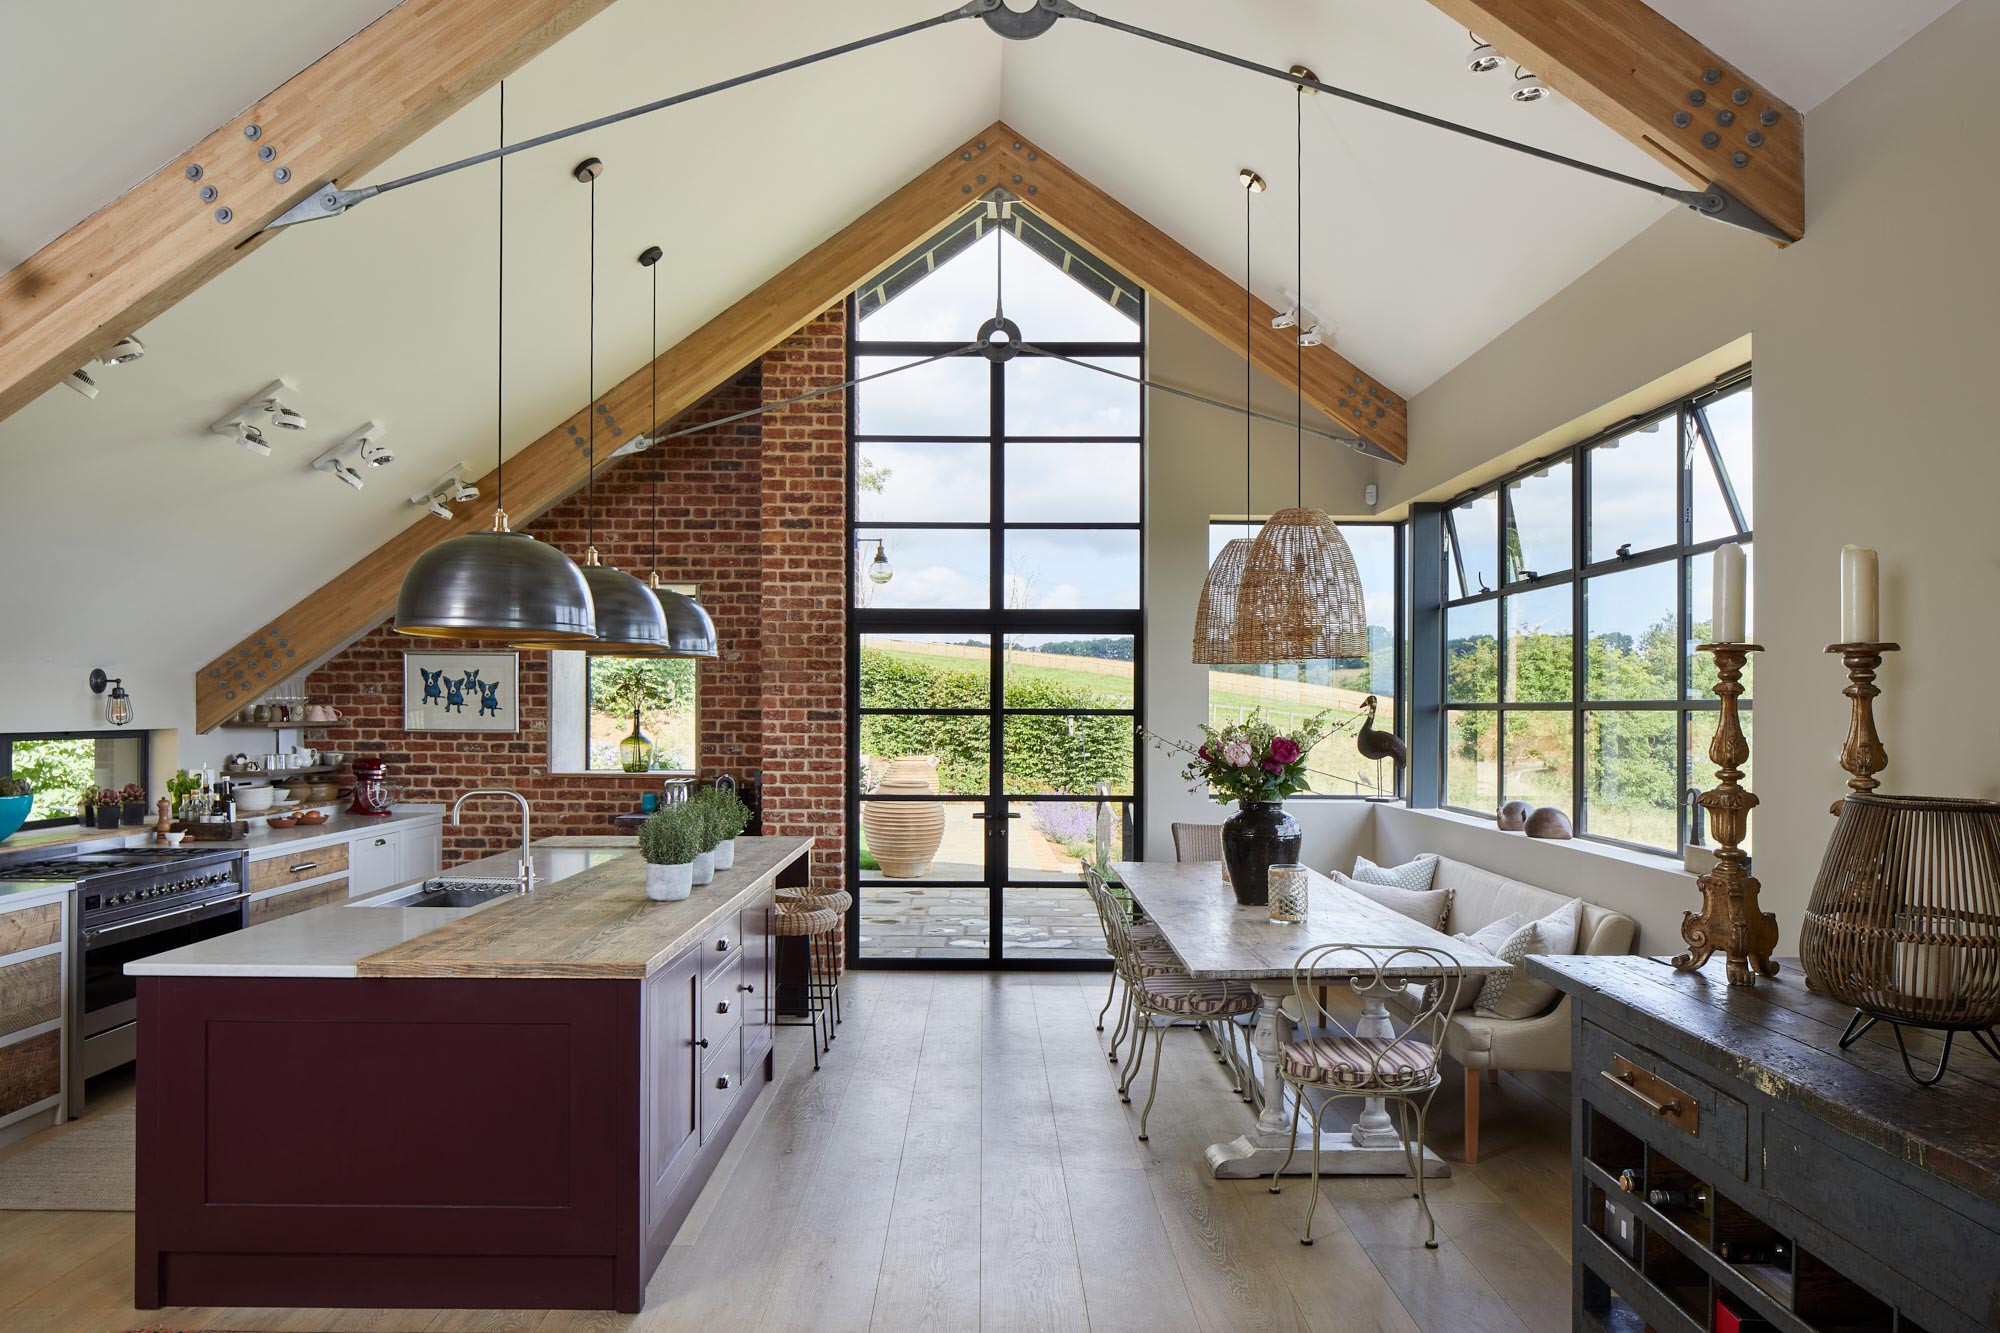 Large kitchen diner with vaulted ceiling